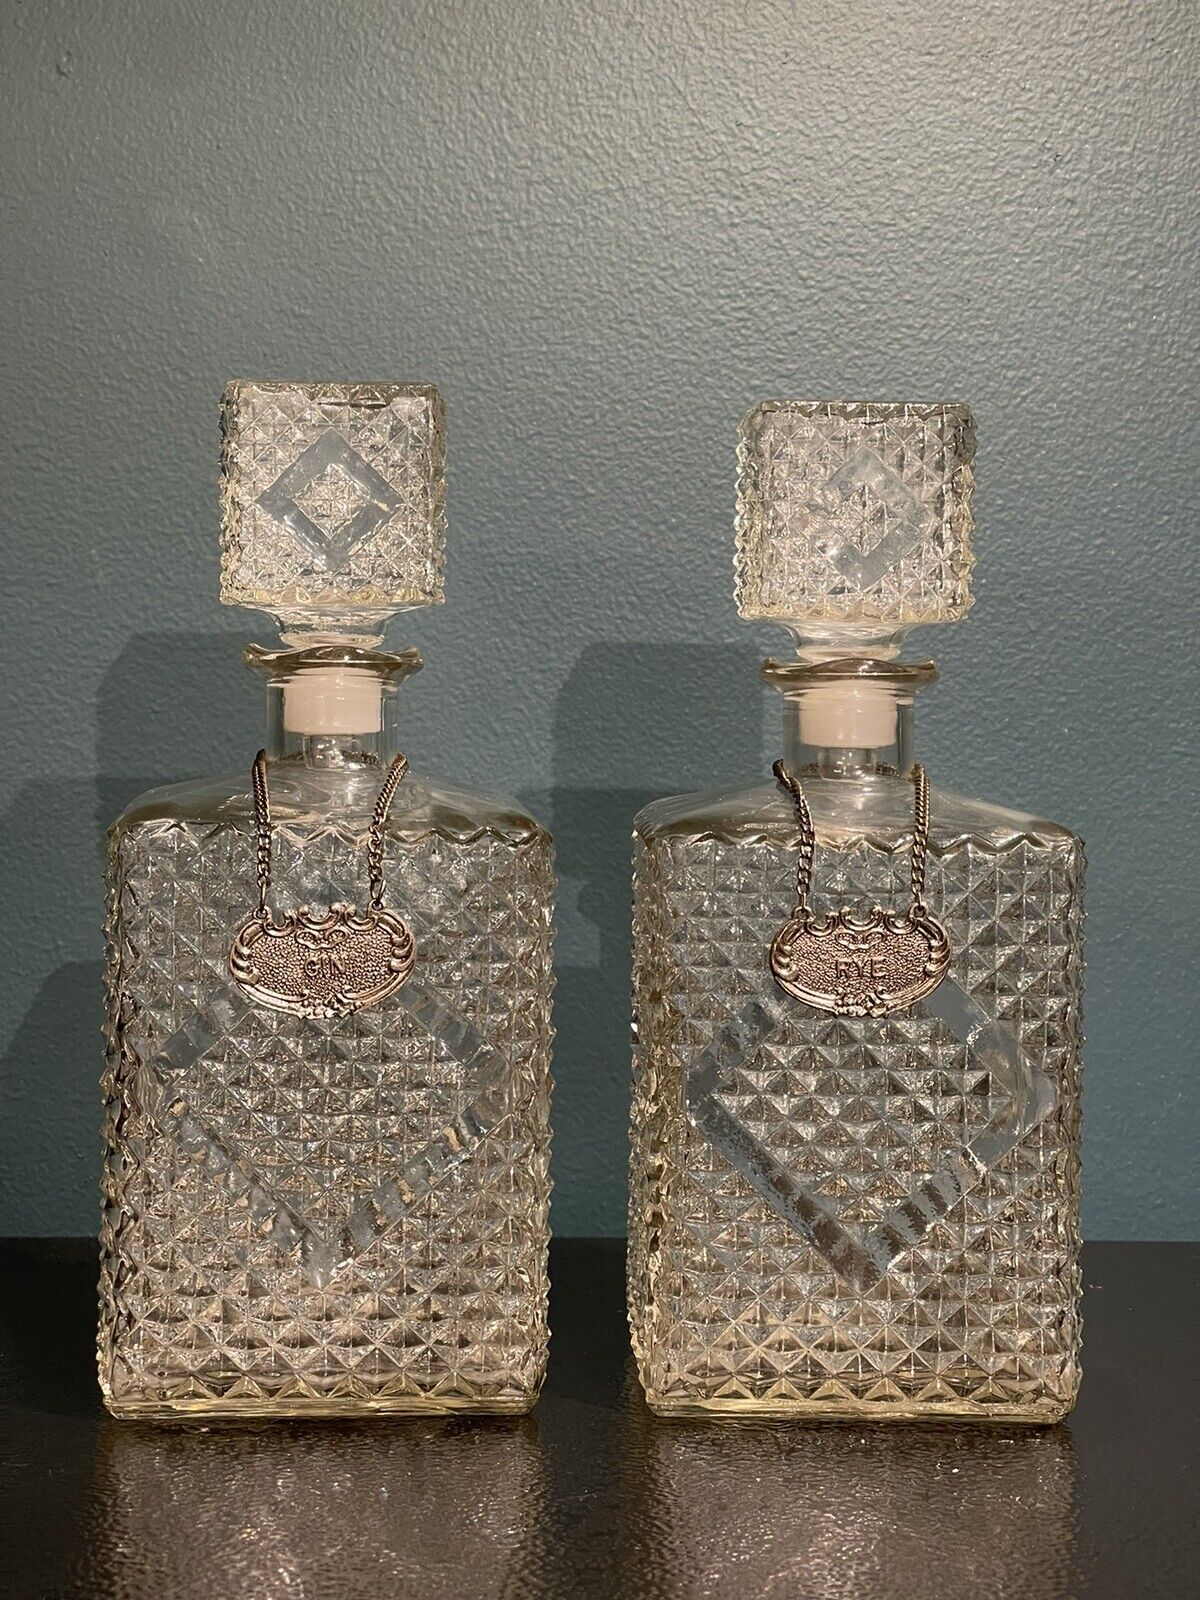 Vintage  Set Of 2 Crystal Cut Decanters  Labels ( Gin And Rye) l 4  H 9.5  W 3.5